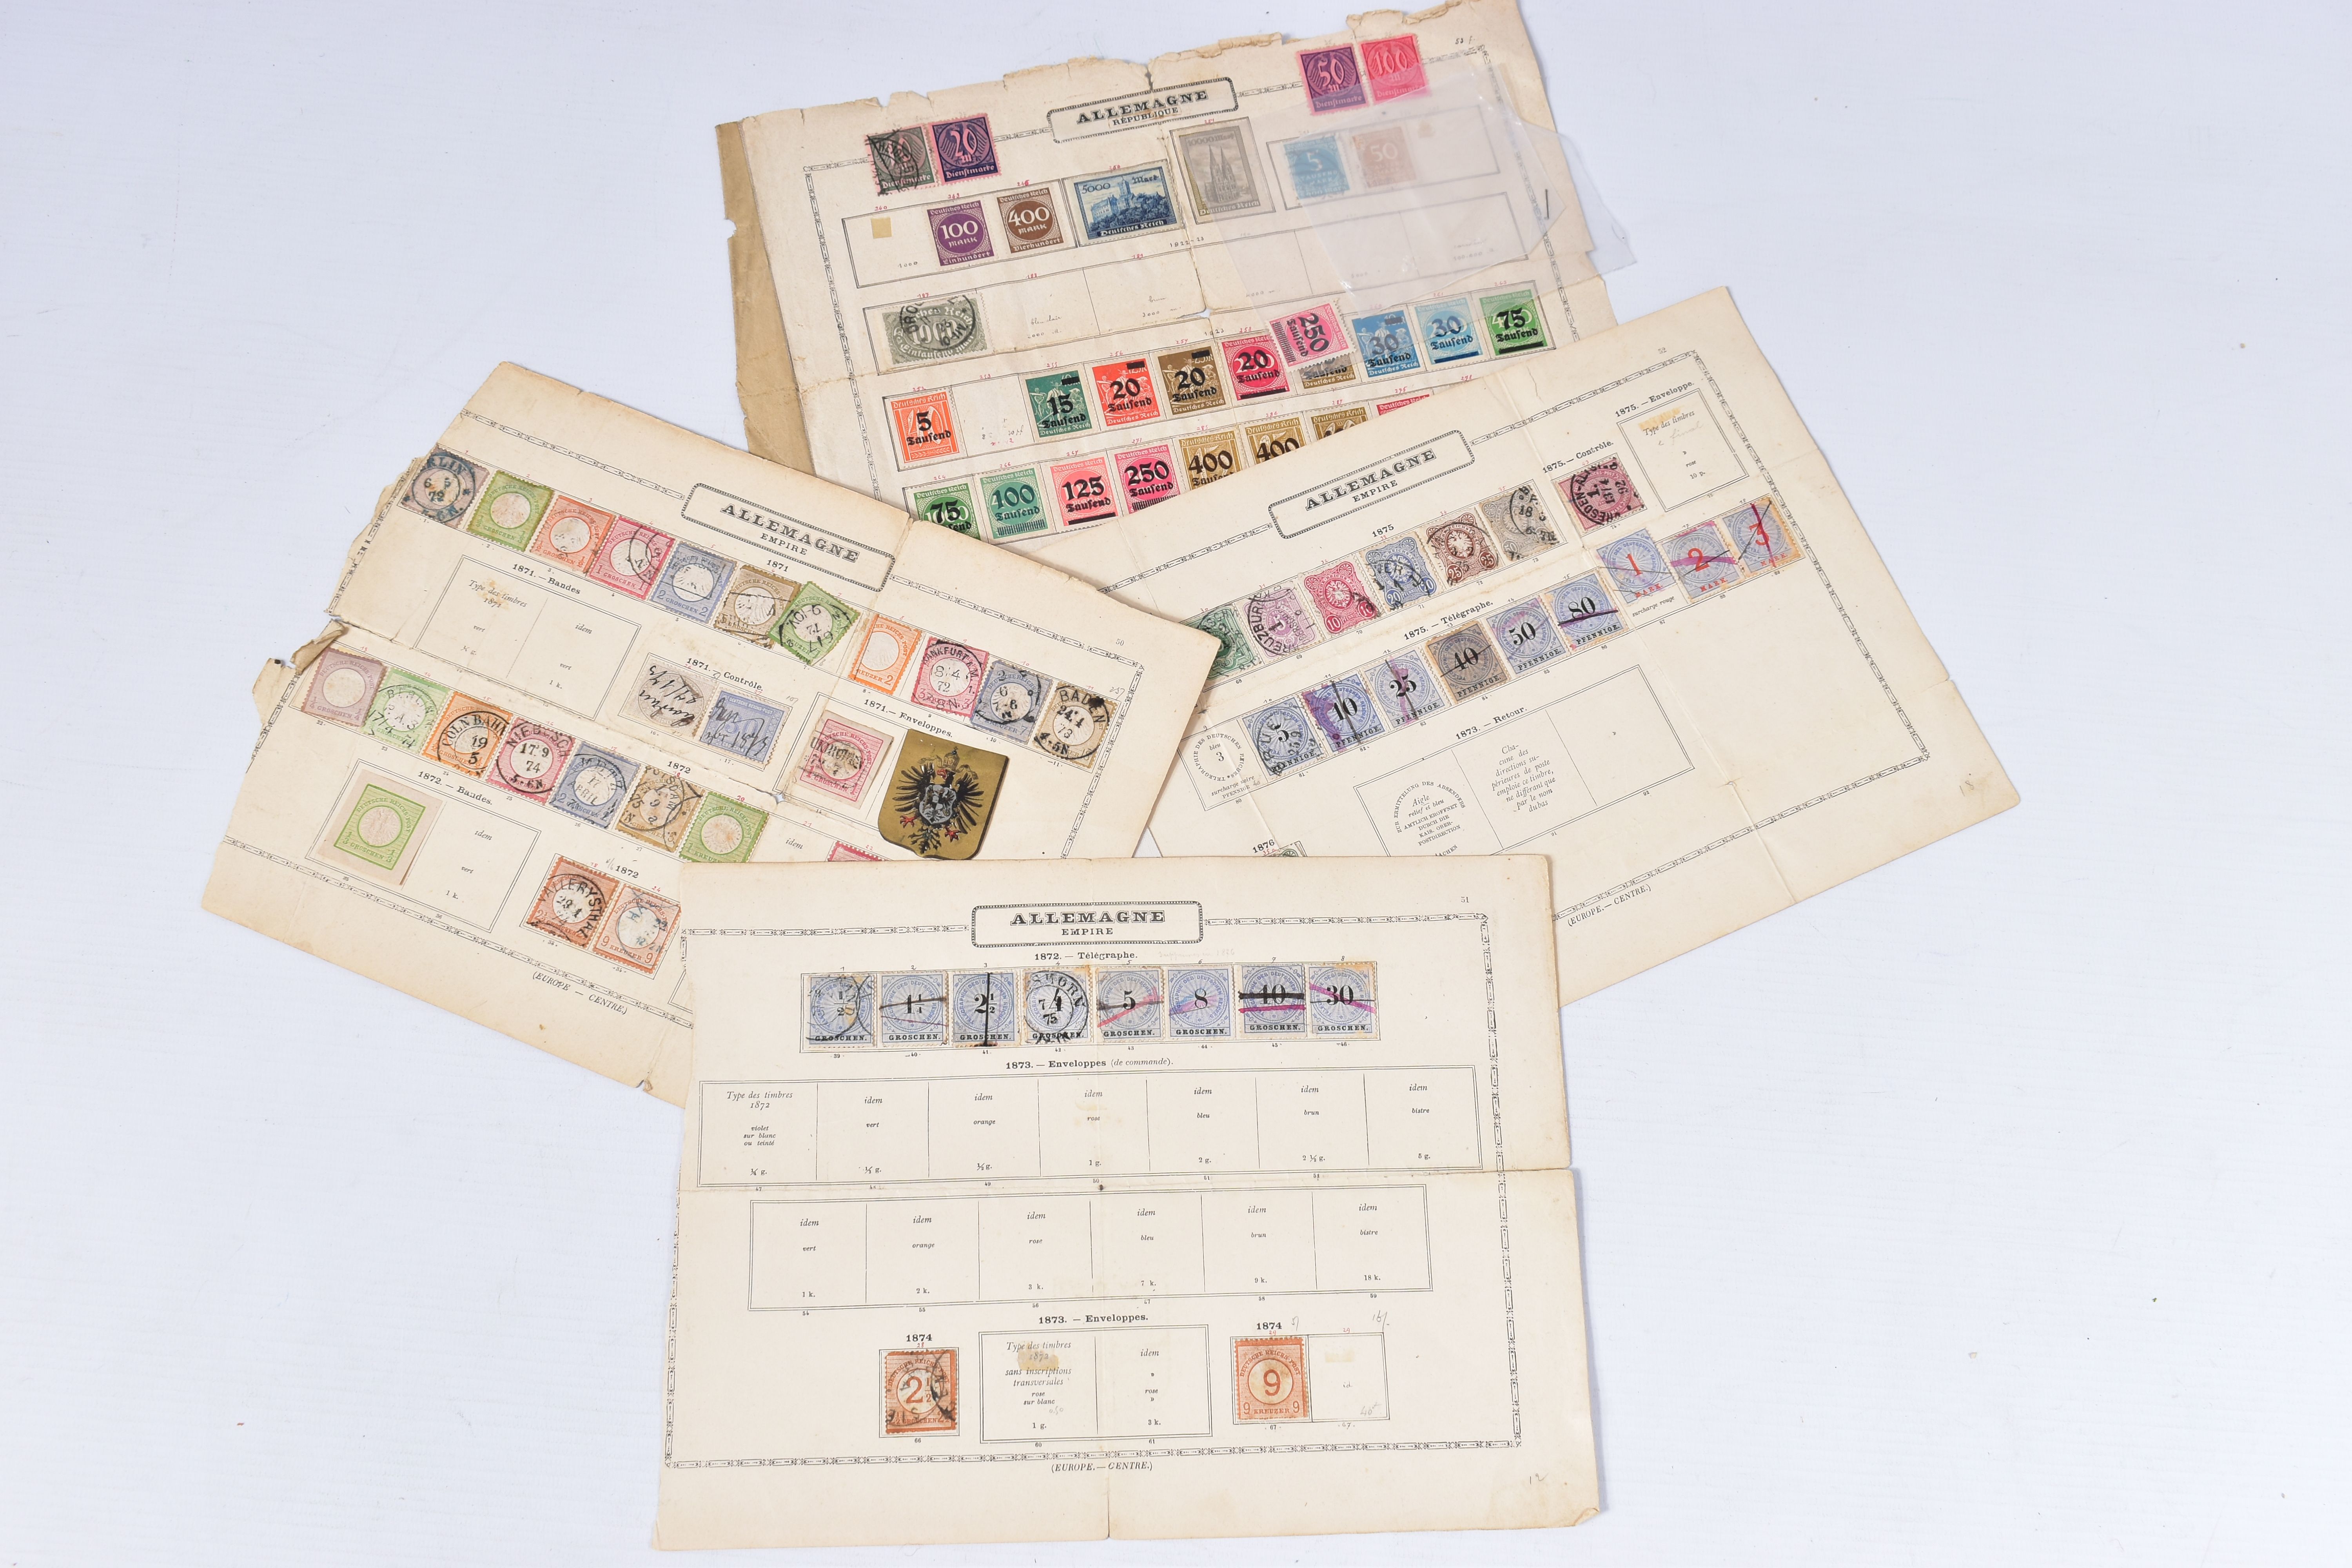 FOLDER OF OLD GERMAN STAMPS, on album pages from 1875 to 1920s, also note some revenues from the